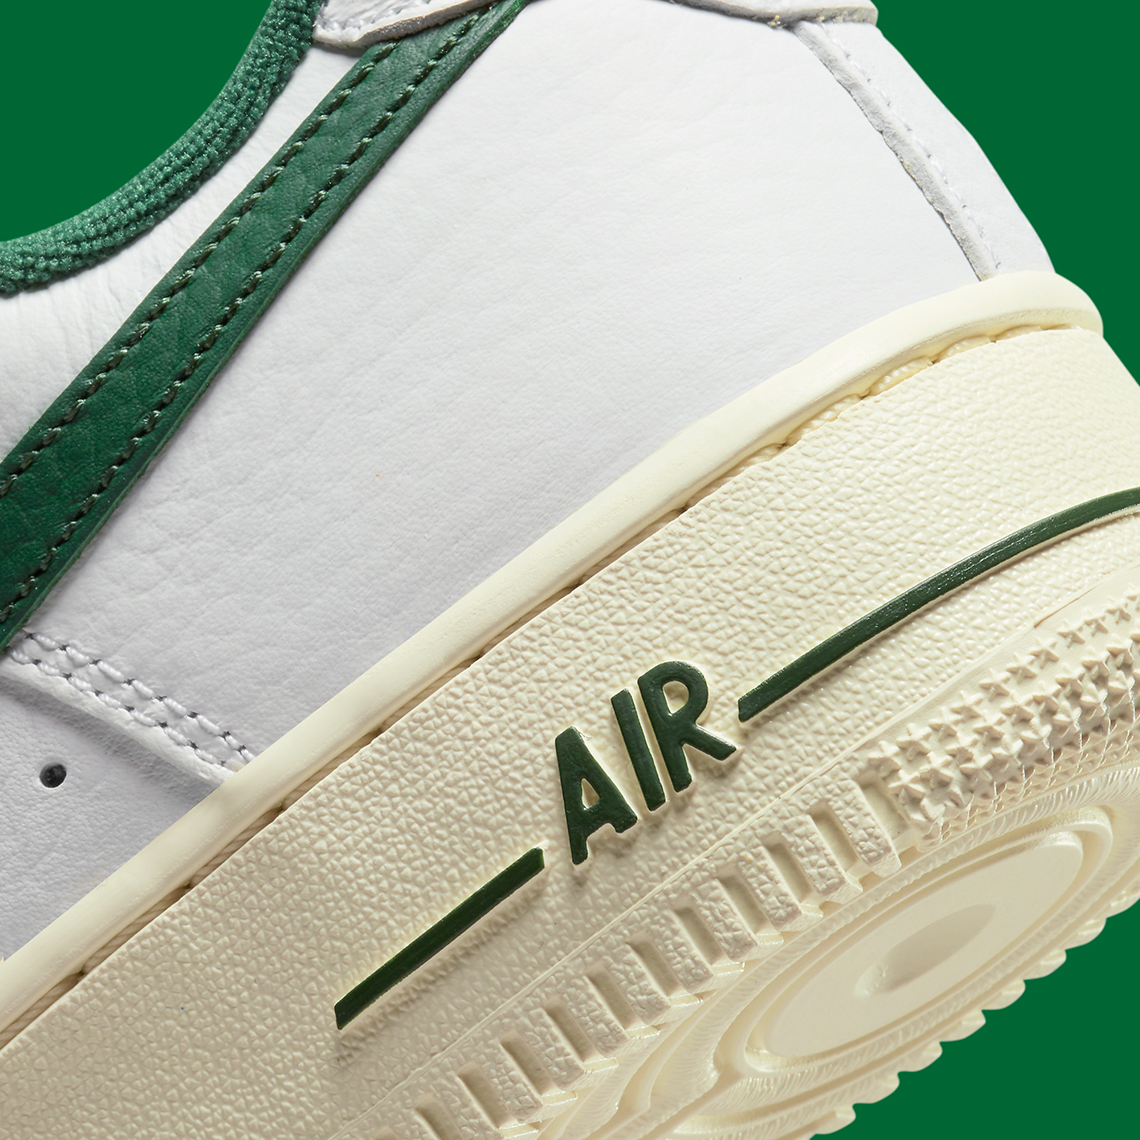 Nike's Air Force 1 Low Command Force White Gorge Green Releases July 25 -  Sneaker News